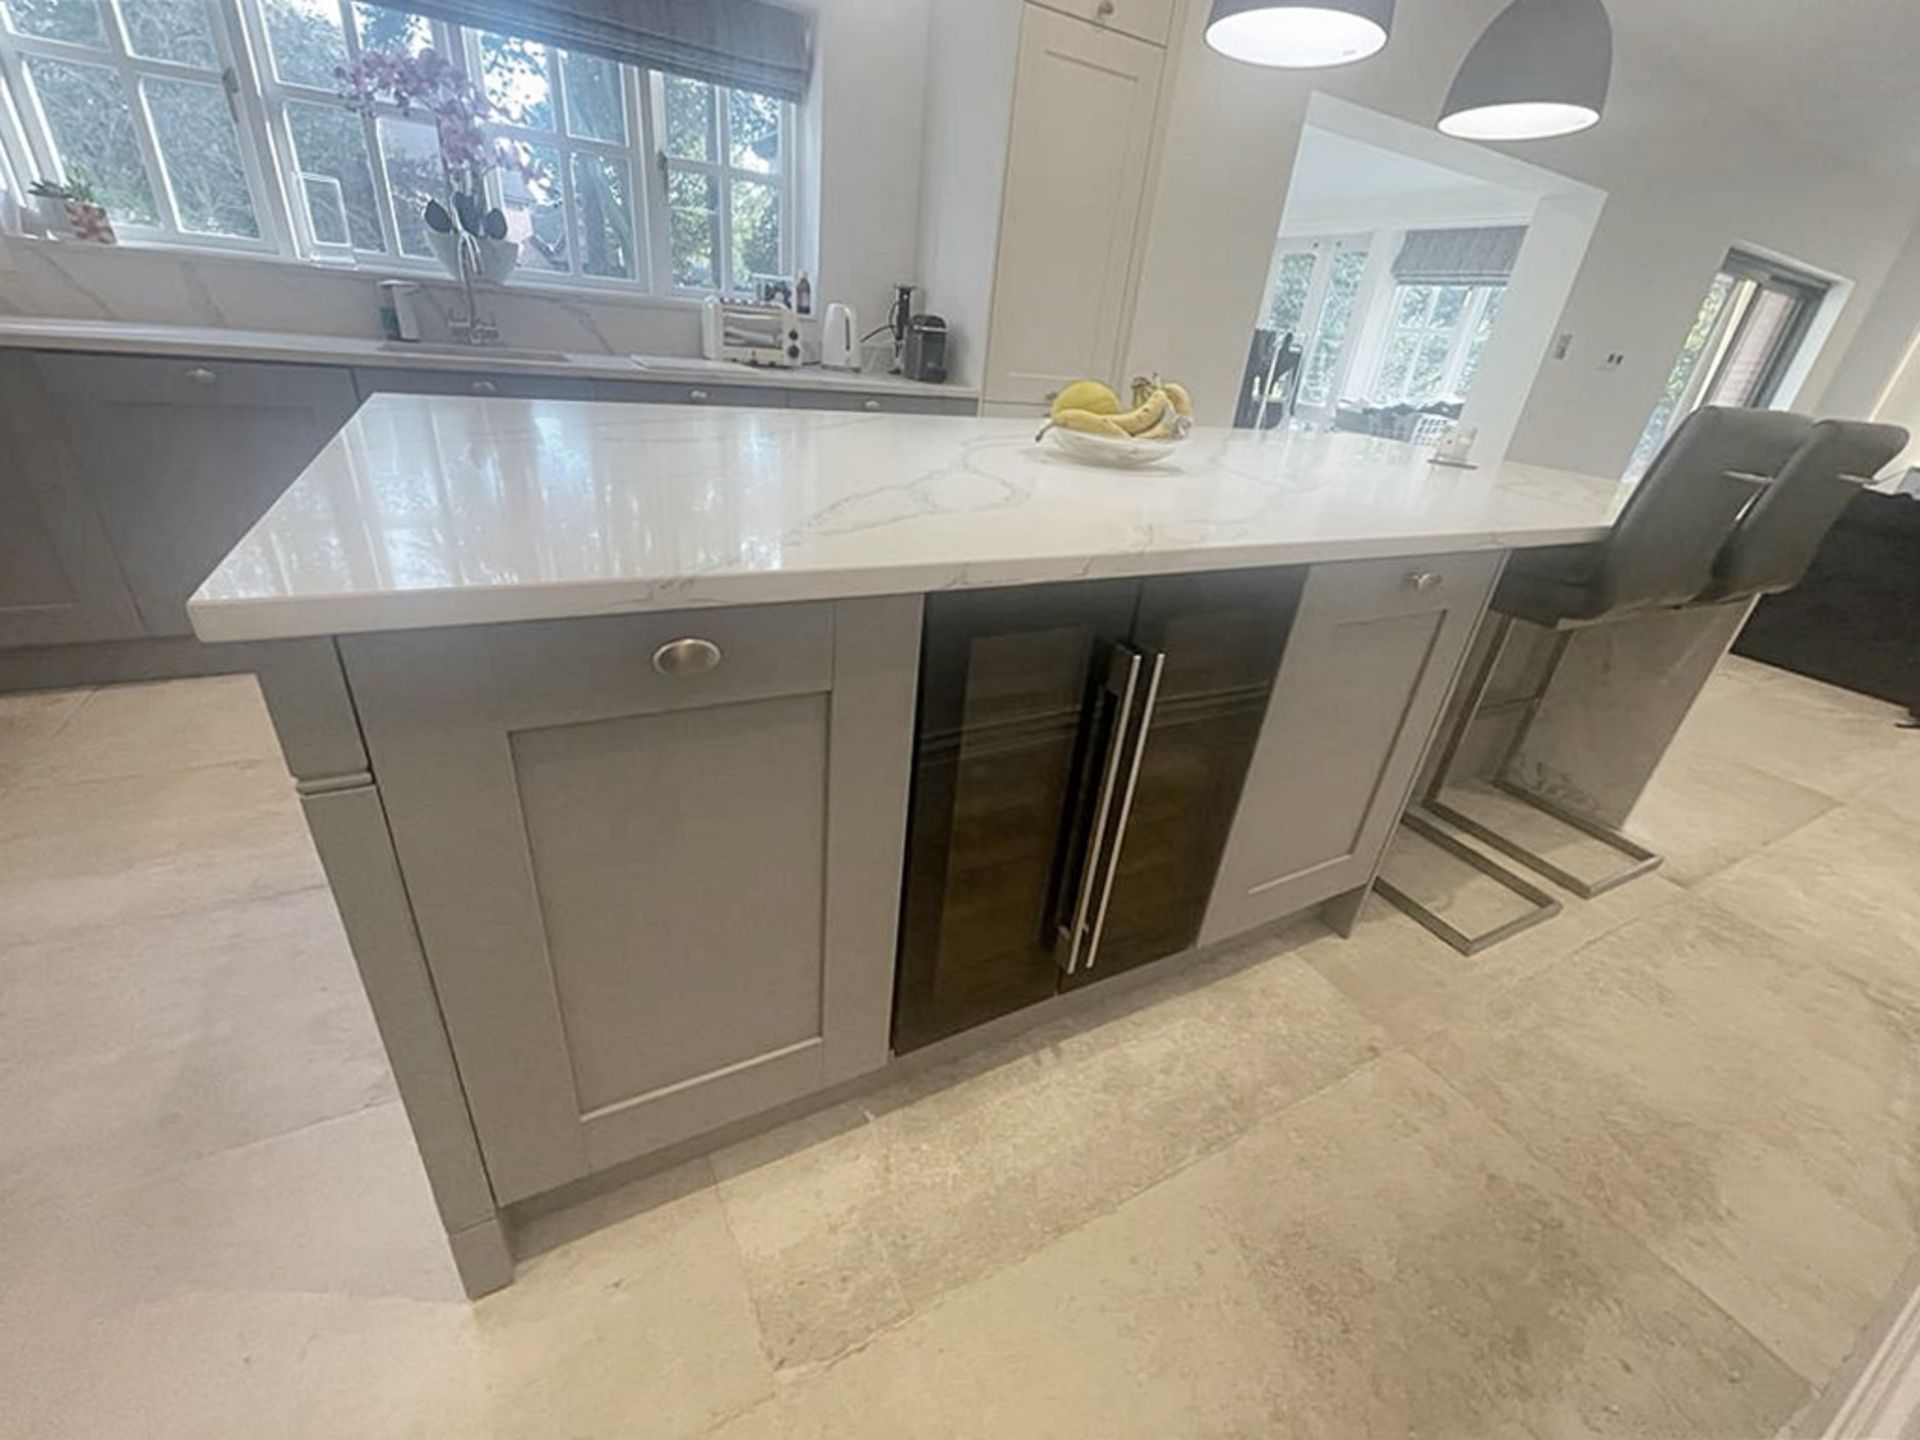 1 x SIEMATIC Bespoke Shaker-style Fitted Kitchen, Utility Room, Appliances & Modern Quartz Surfaces - Image 132 of 153